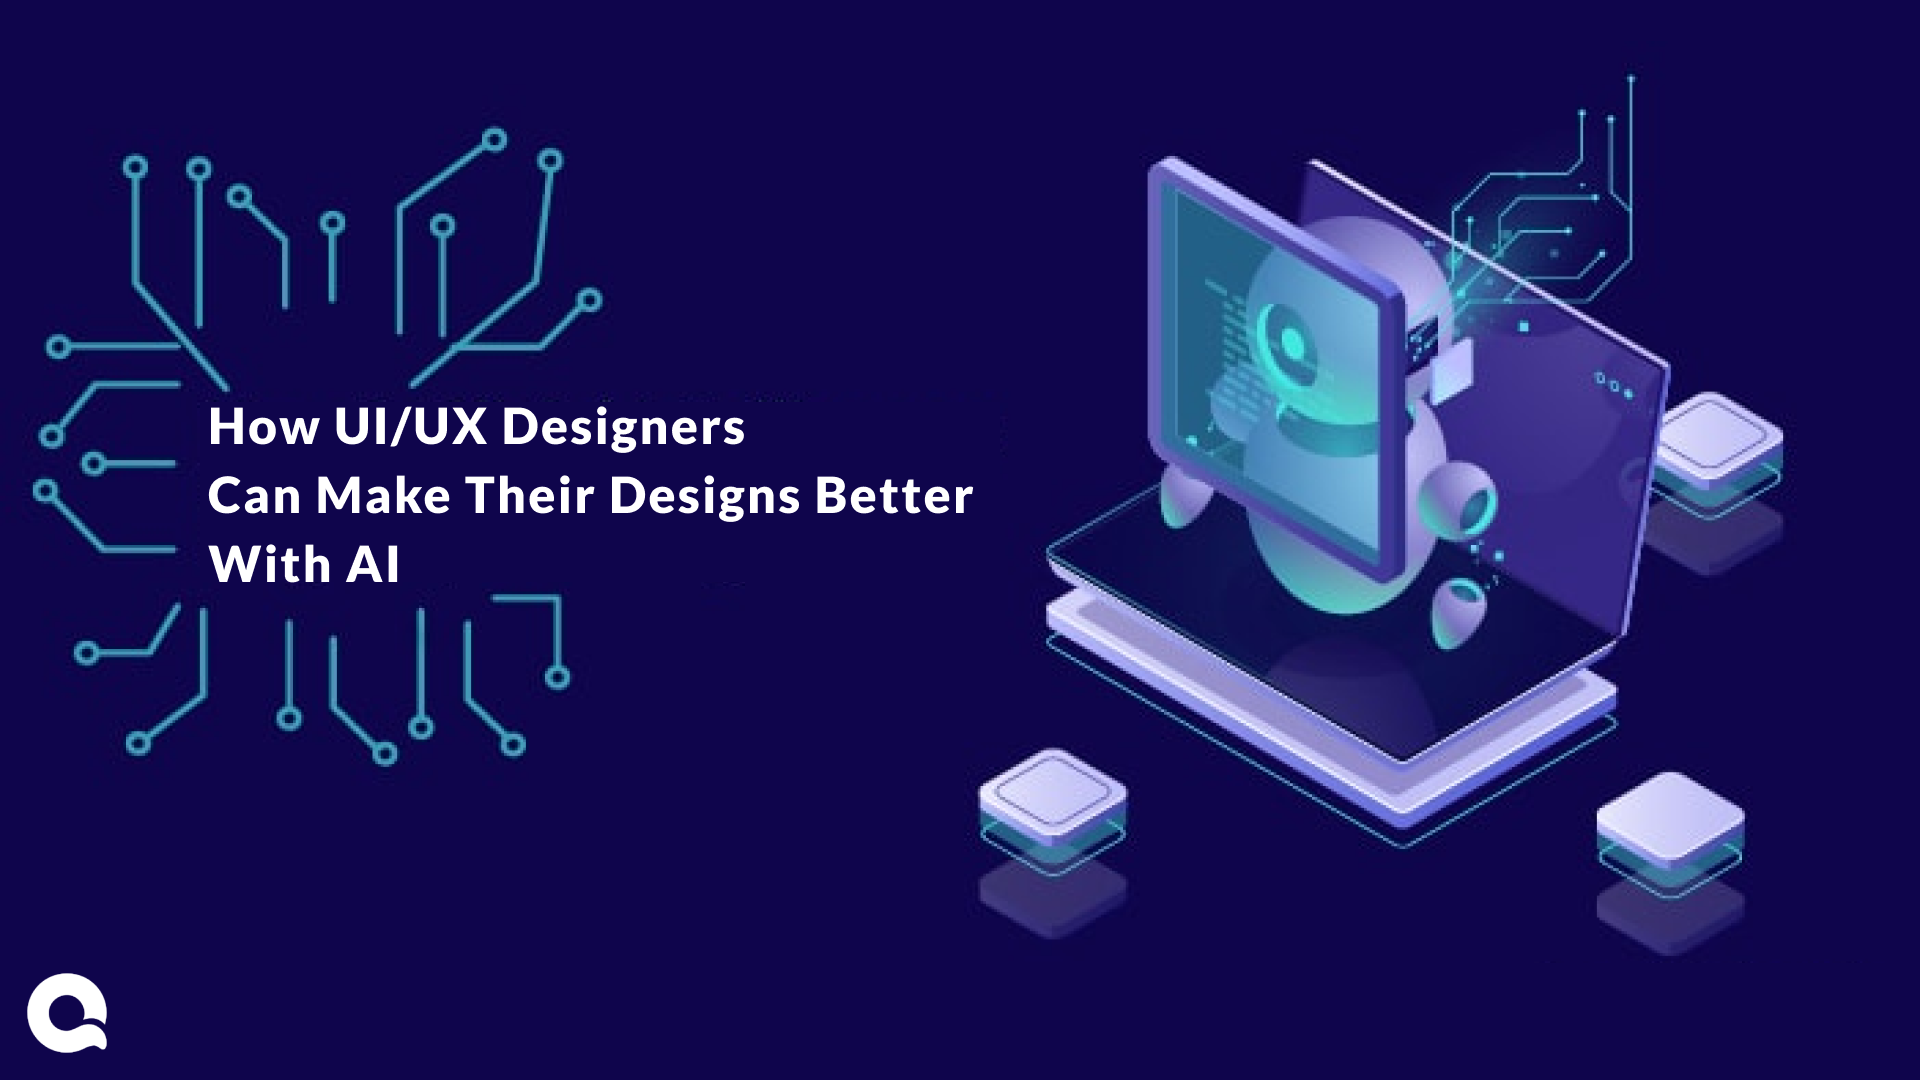 How UI UX Designers can make their design Better with Artificial Intelligence